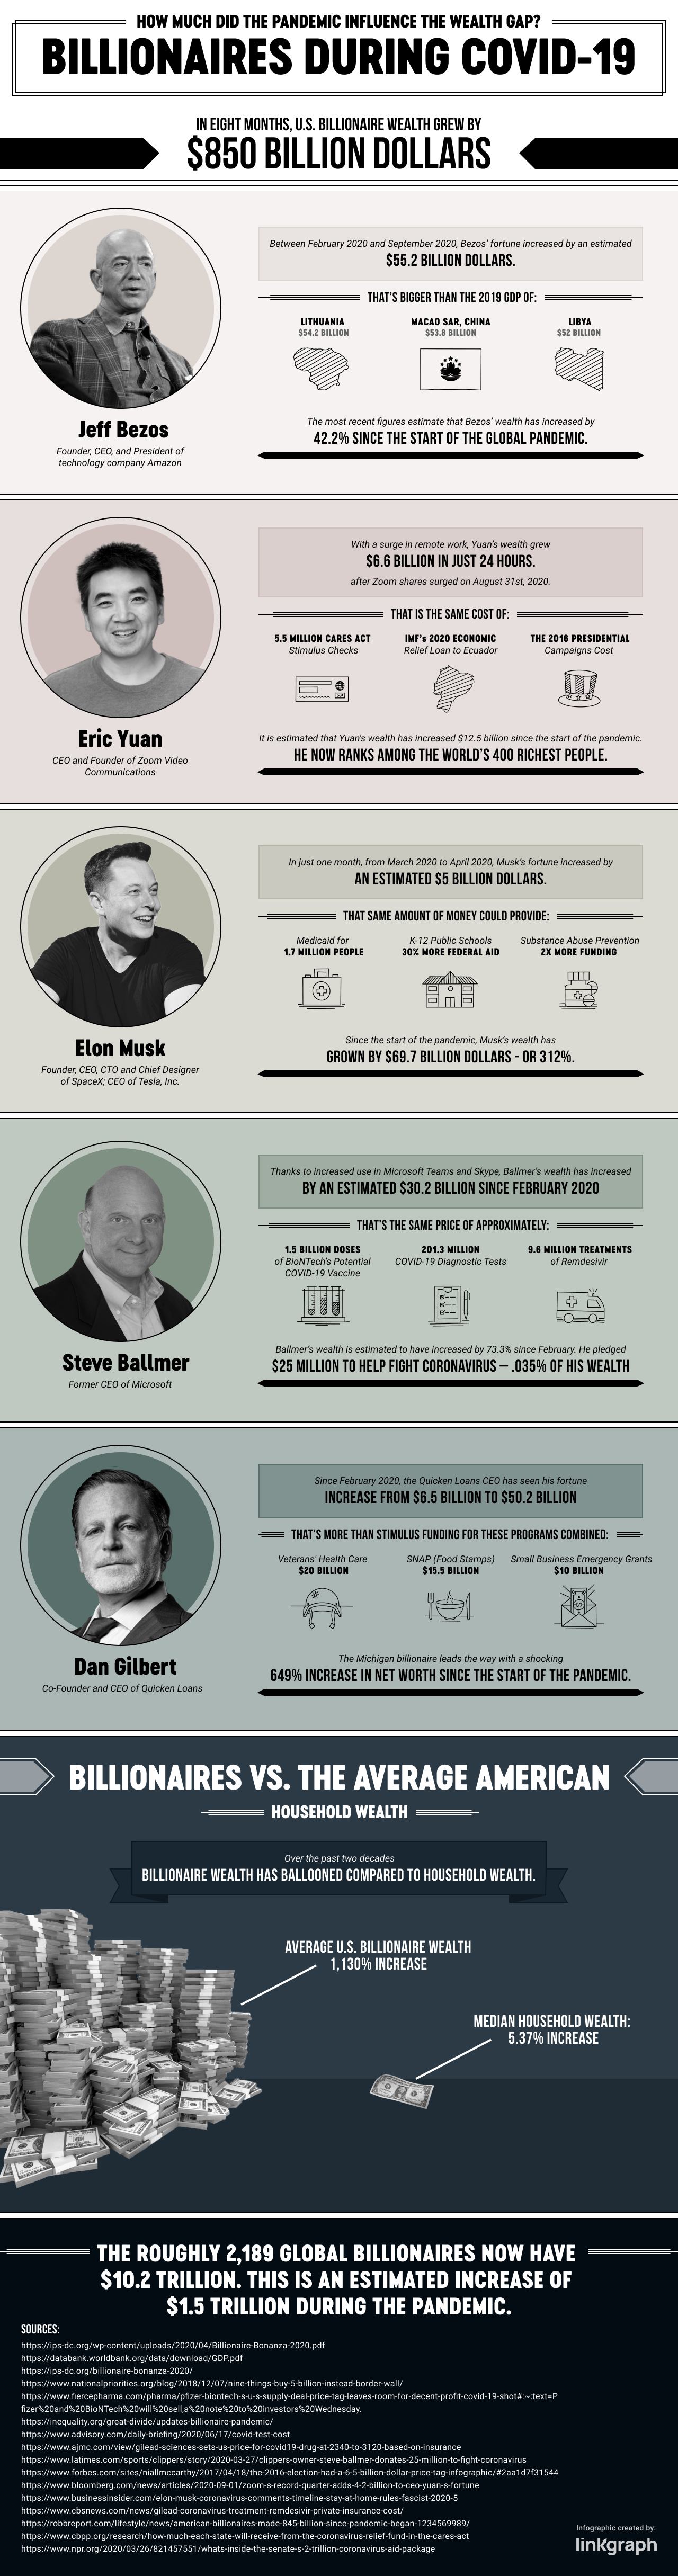 Billionaire wealth during COVID-19 pandemic | Infographic created by LinkGraph